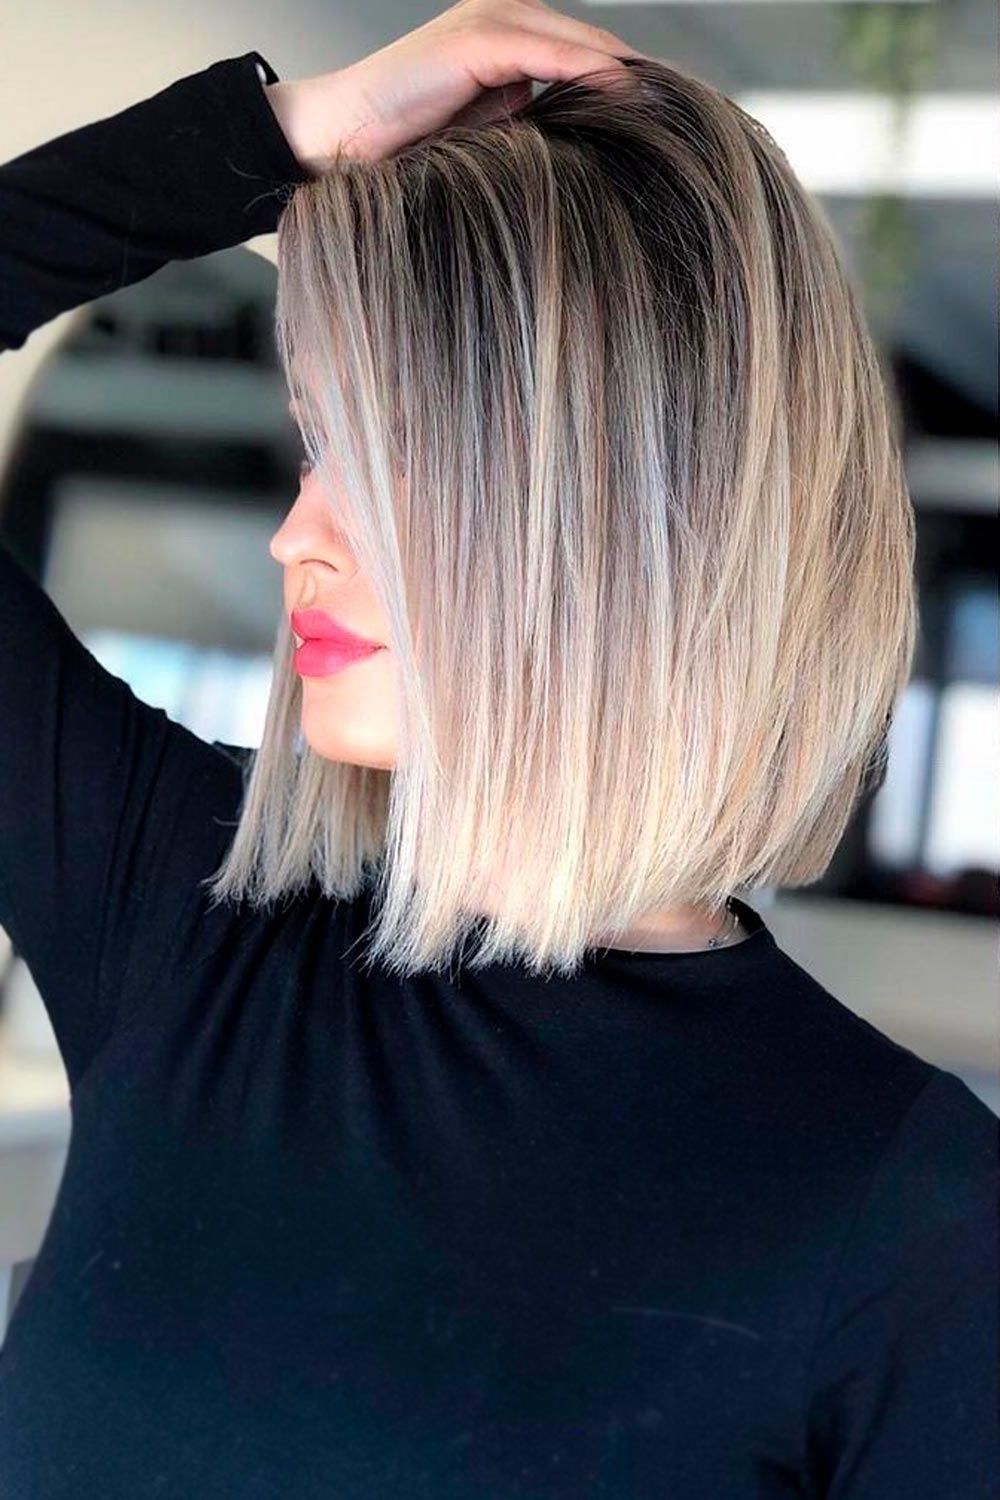 20 Blunt Bob Hairstyles To Wear This Season – Lovehairstyles Pertaining To Most Recently Released Classy Medium Blonde Bob Haircuts (View 7 of 20)